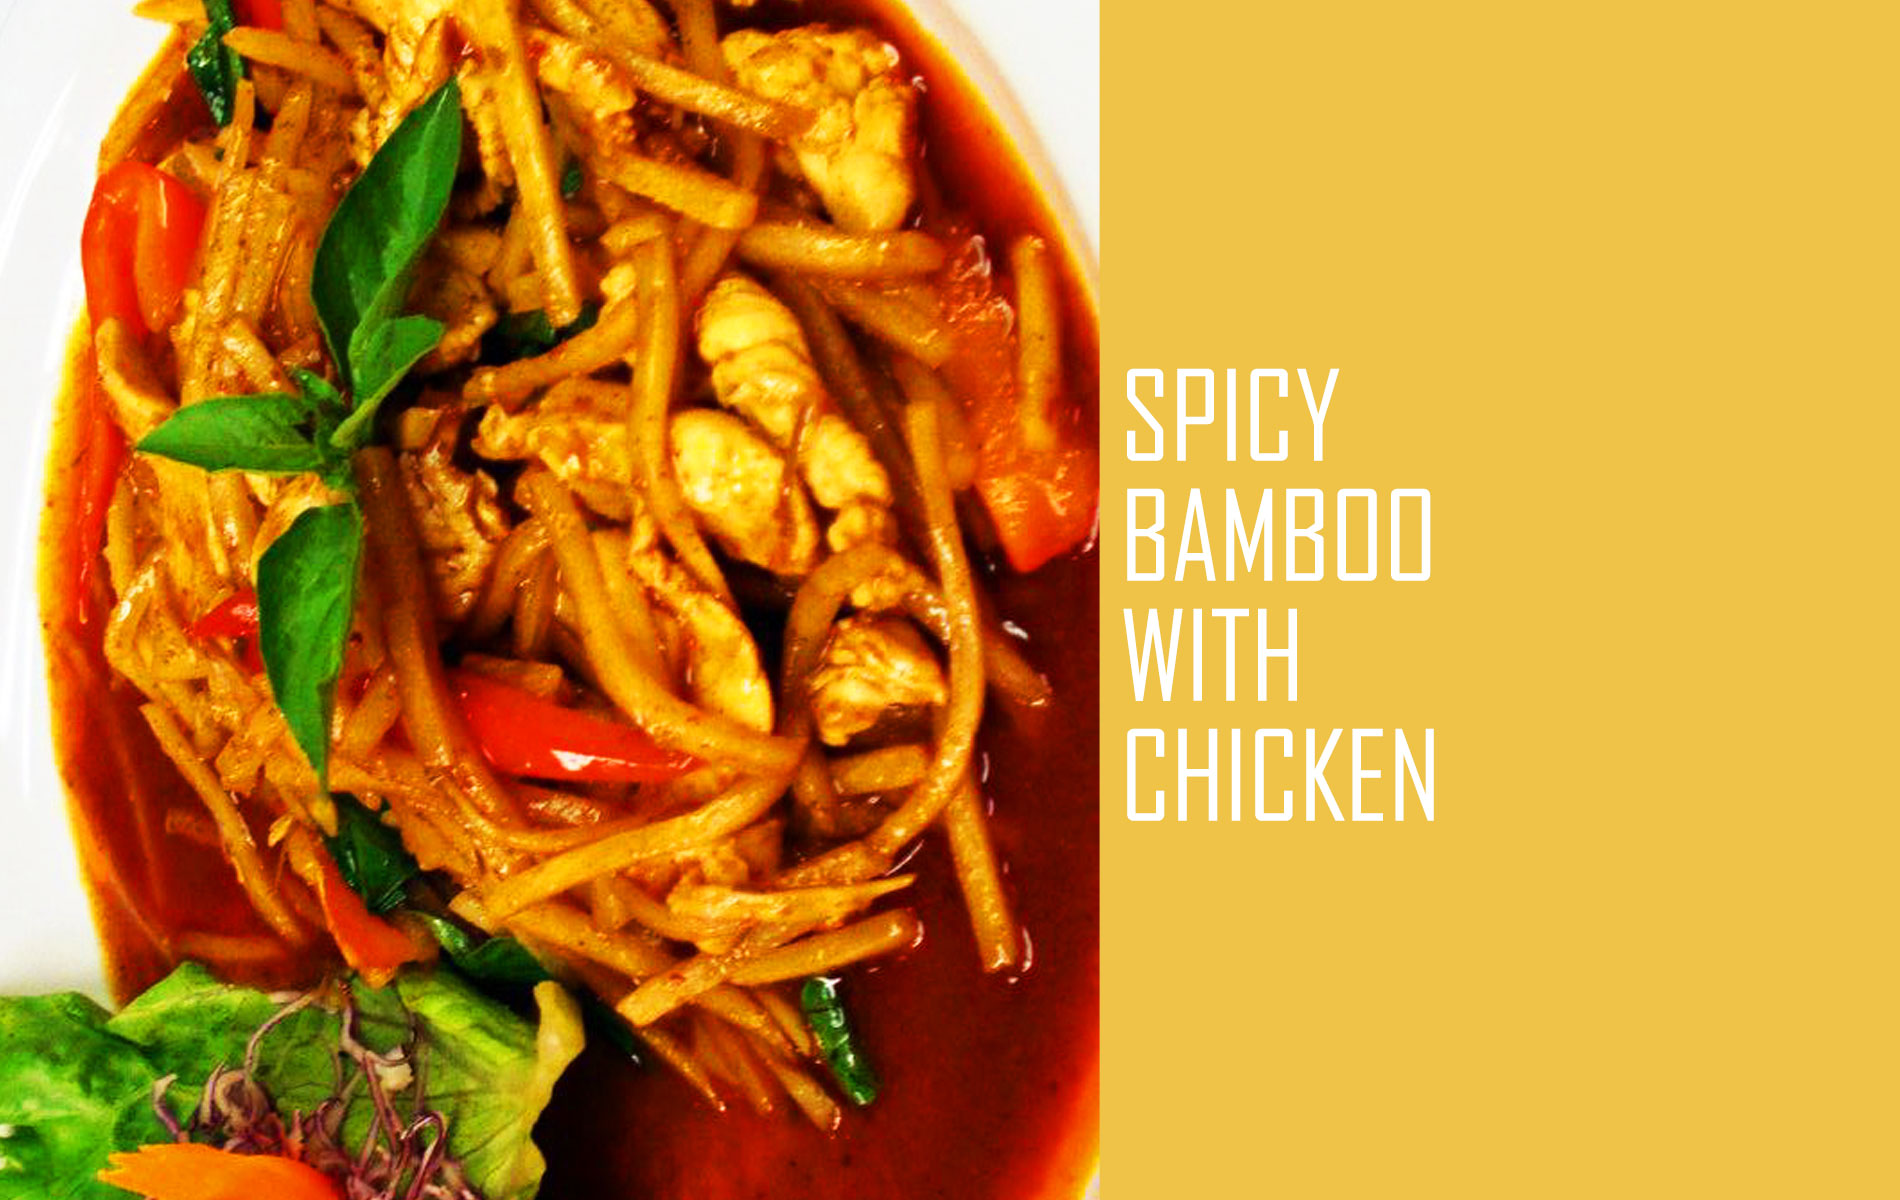 Spicy Bamboo With Chicken